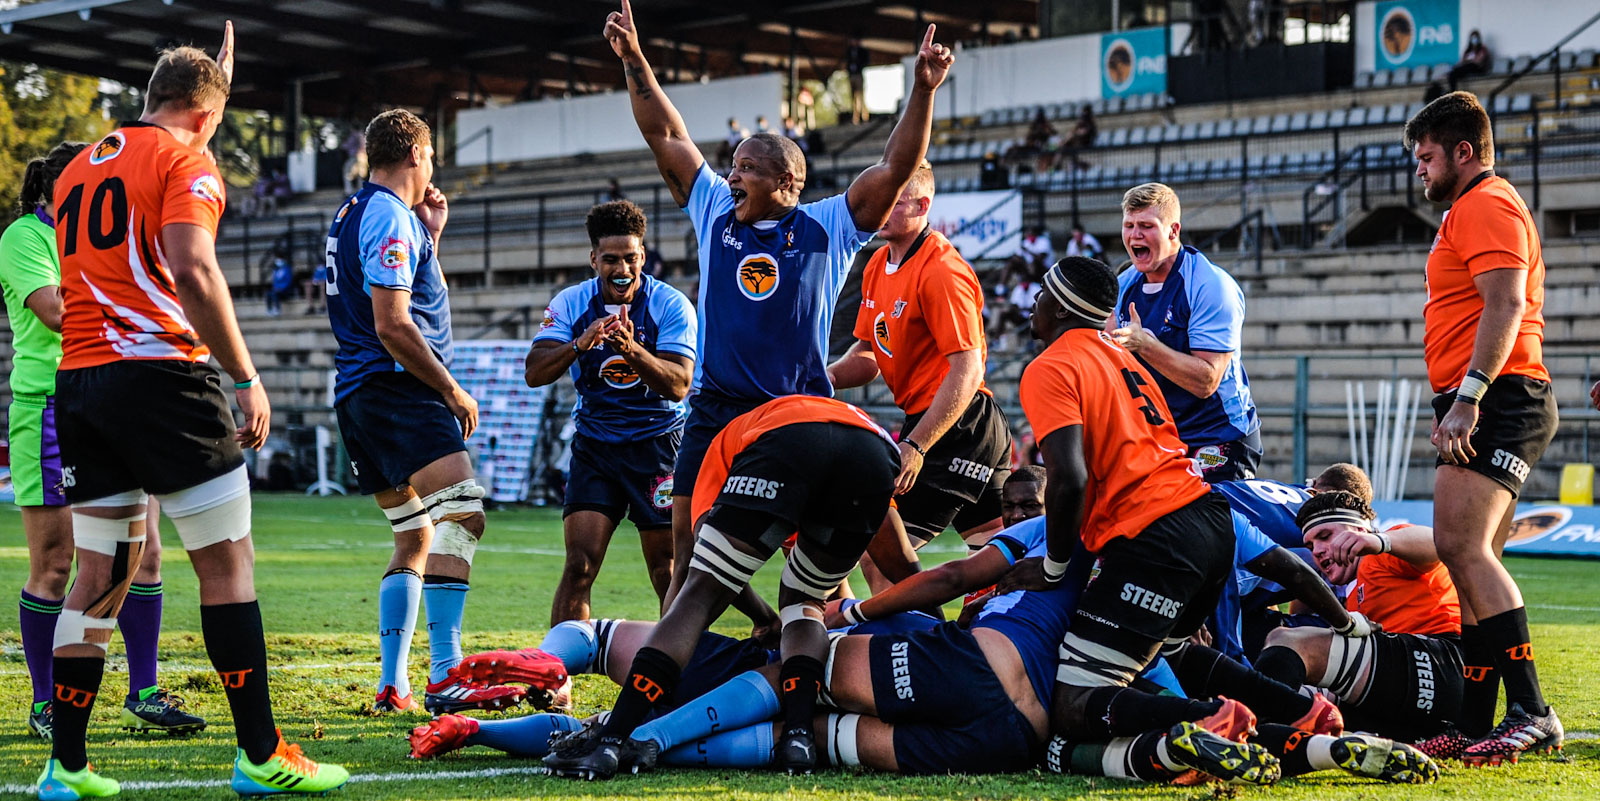 CUT celebrate as Johannes Terblanche goes over for the first try of the match against UJ.